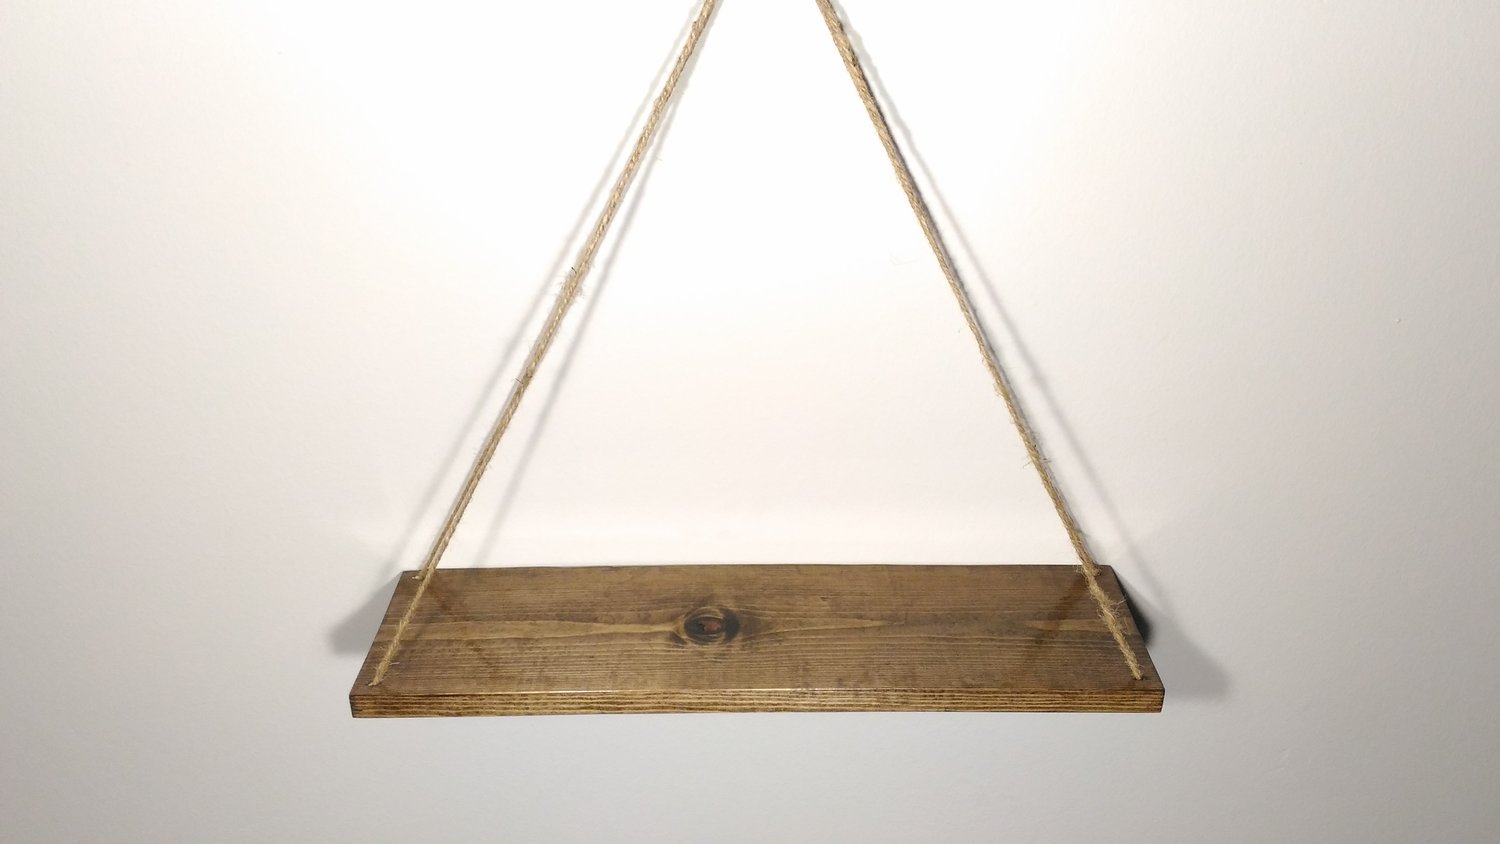 Rustic Wooden Shelves With Rope